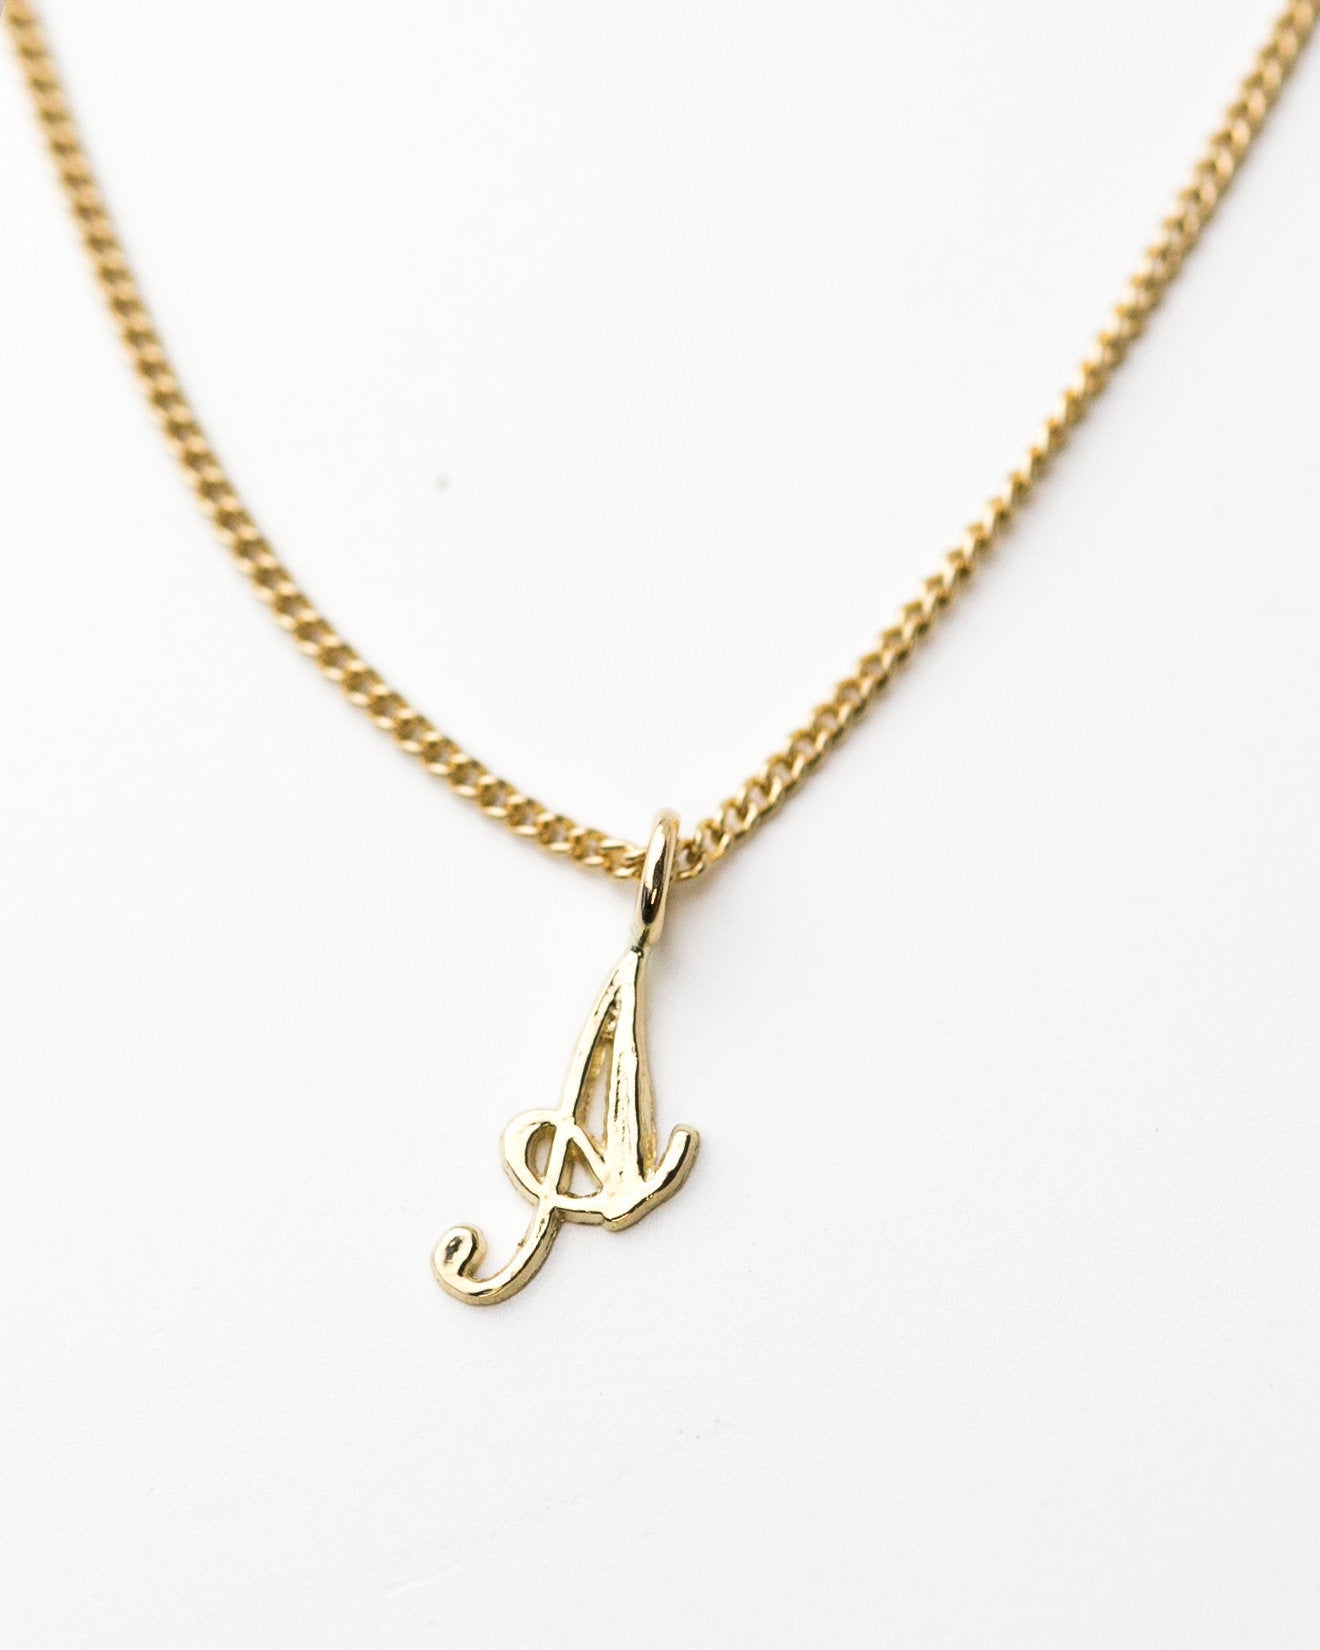 Cursive Crystal Letter Pendant Necklace Accessories A-Z Initial Tennis  Chain Cho | eBay